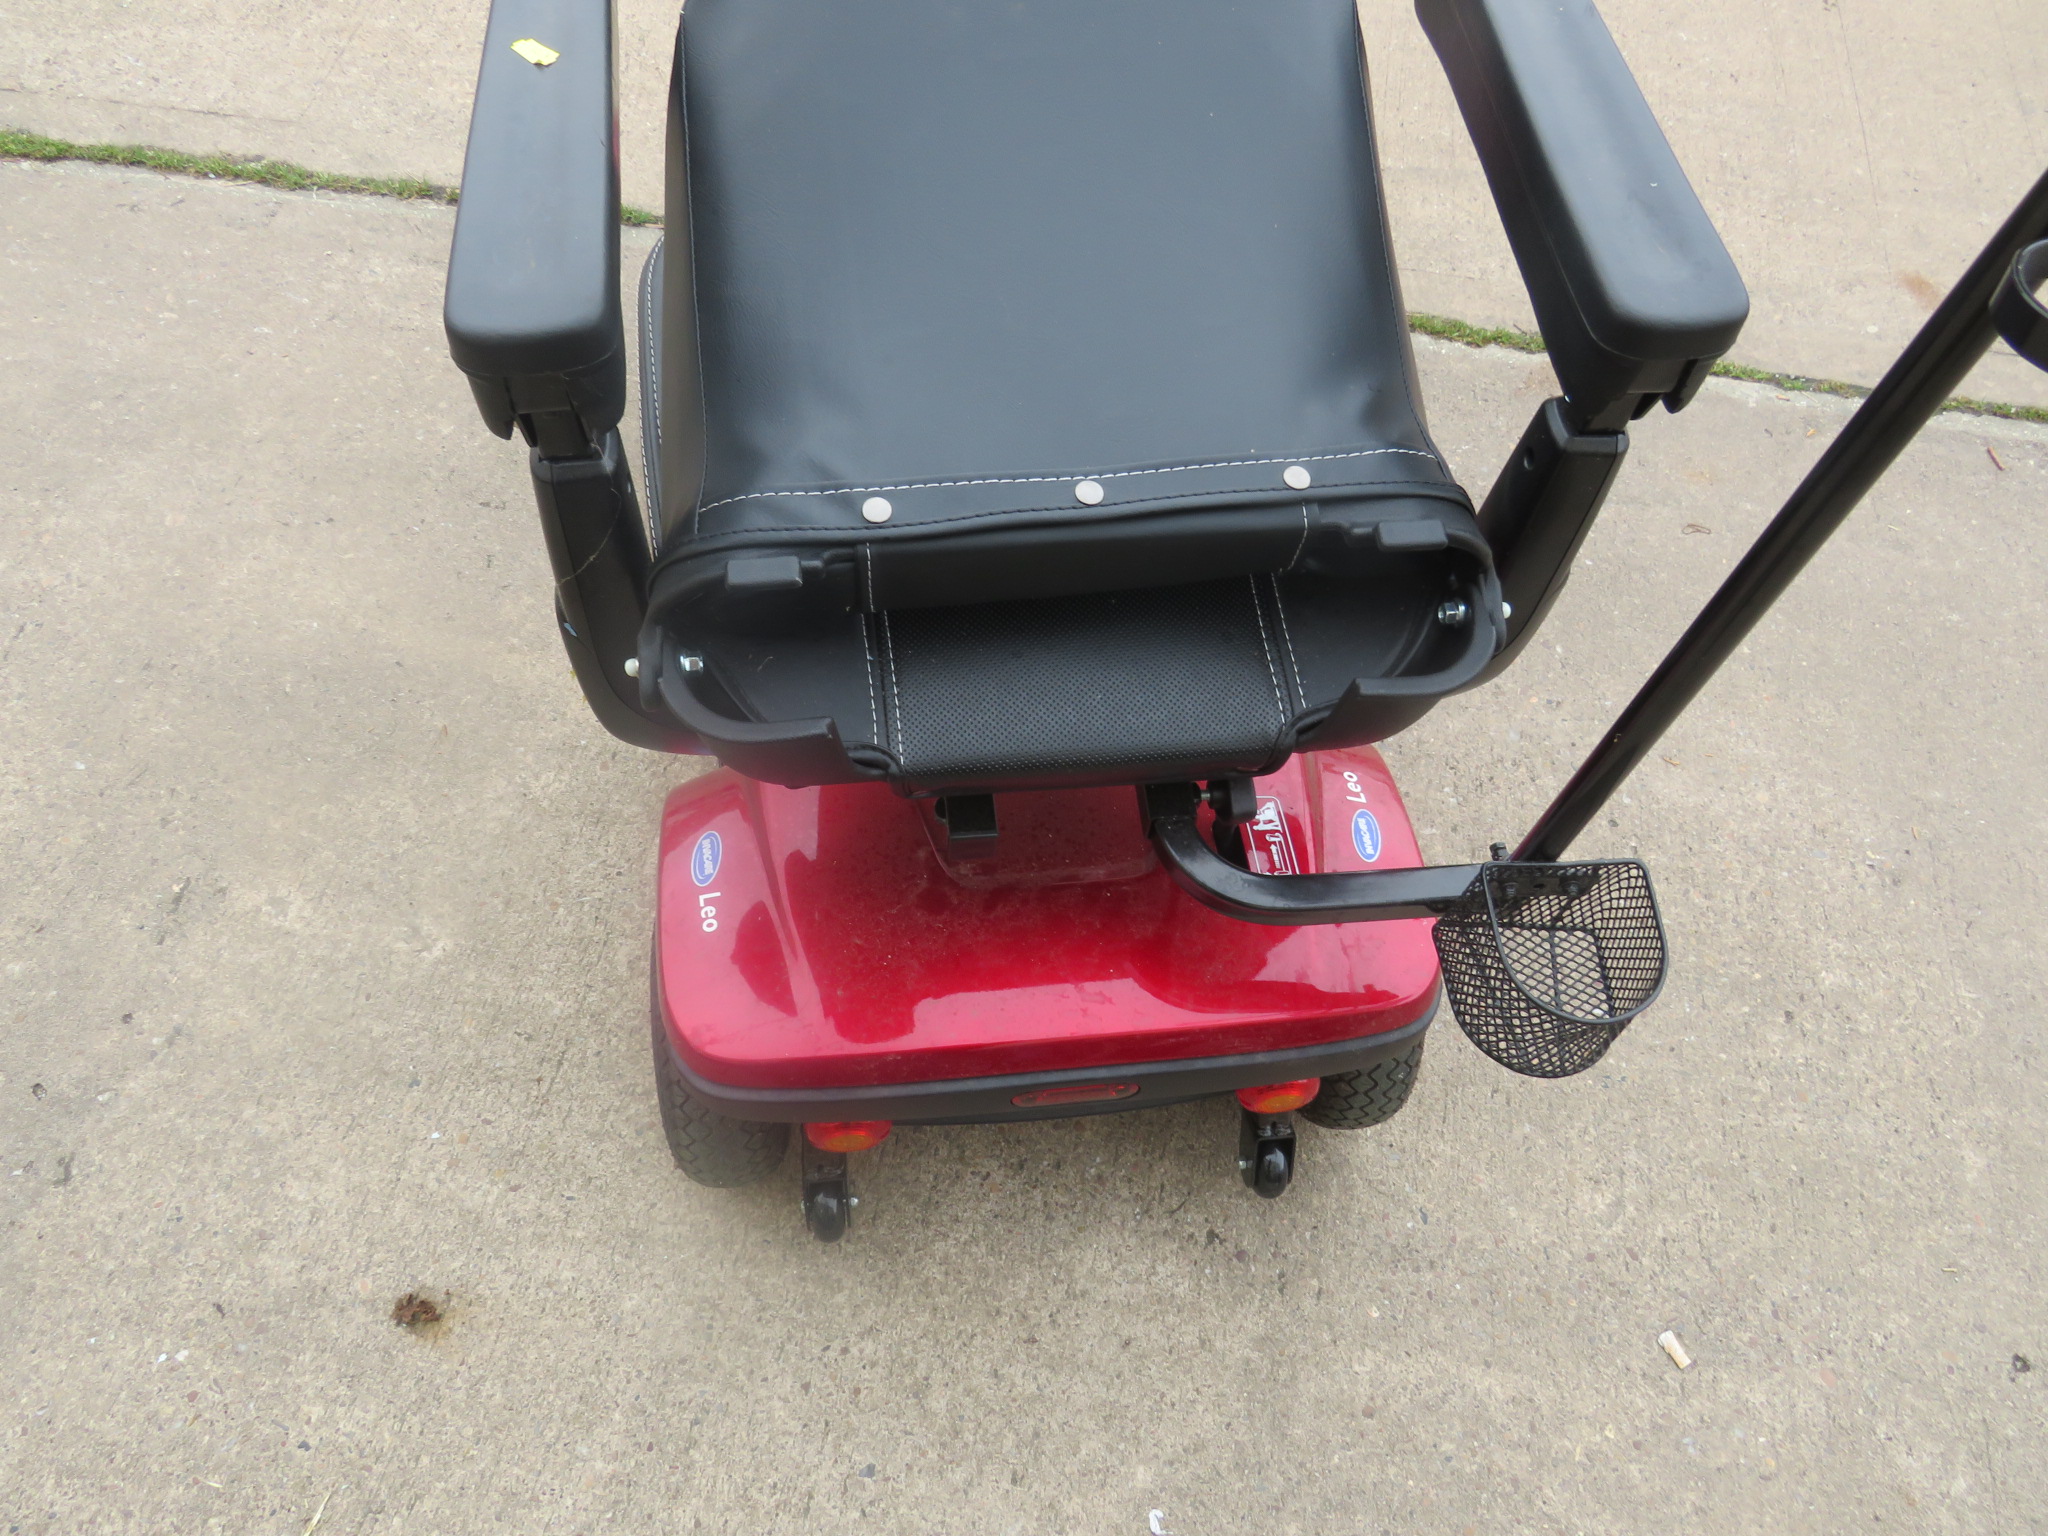 INVACARE LEO RED FOUR WHEEL MOBILITY SCOOTER, WITH KEY, BATTERY CHARGER AND USER MANUAL - Image 5 of 8